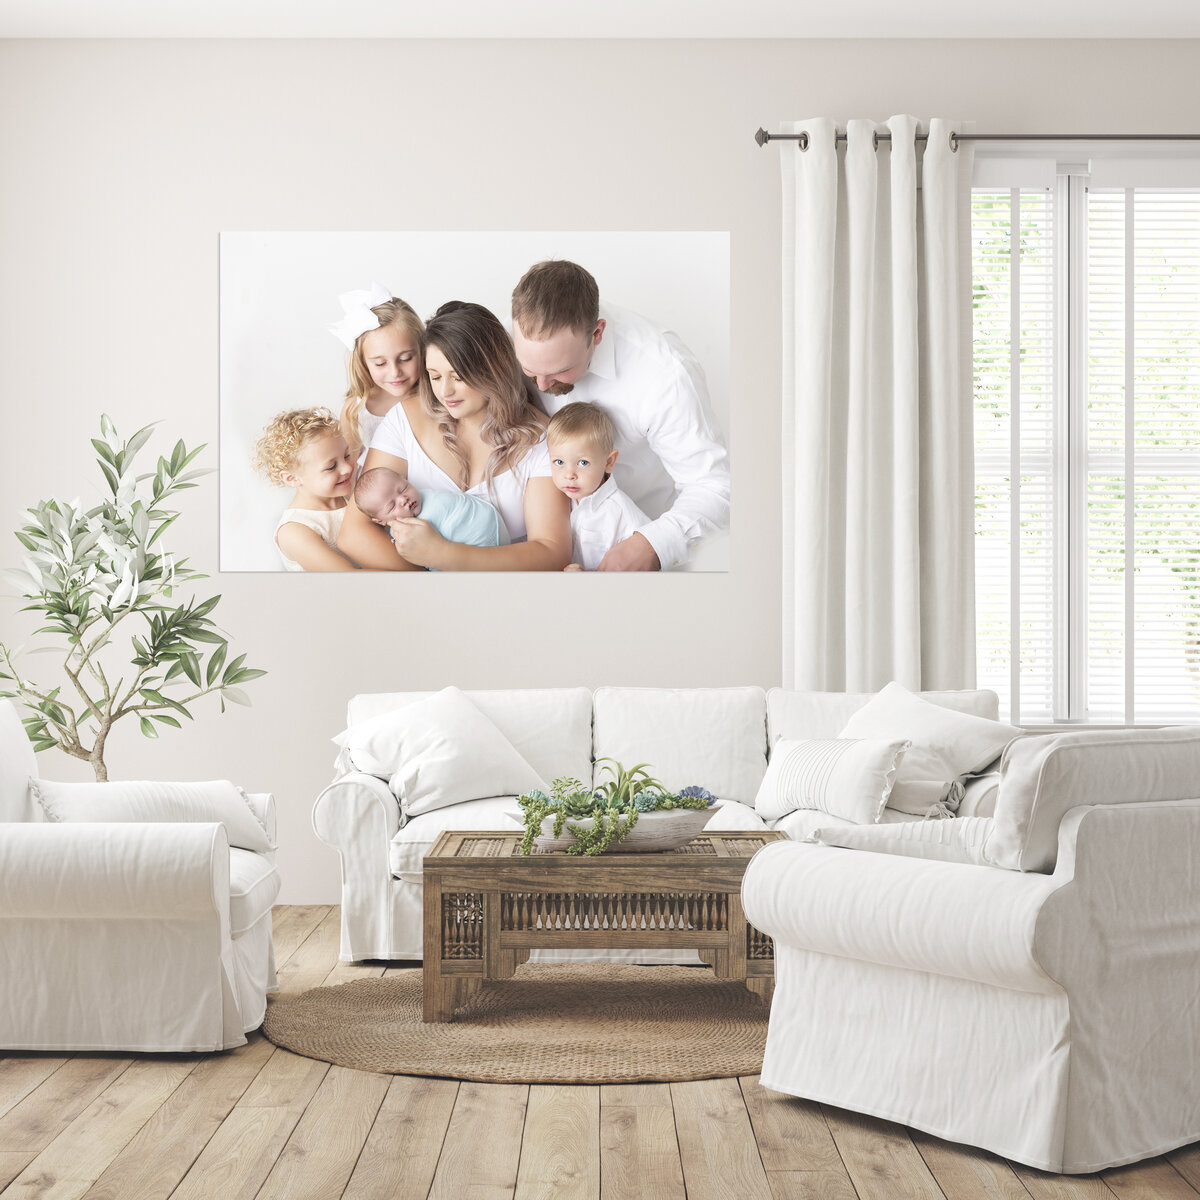 A framed family fine art photo hangs on a wall above a couch